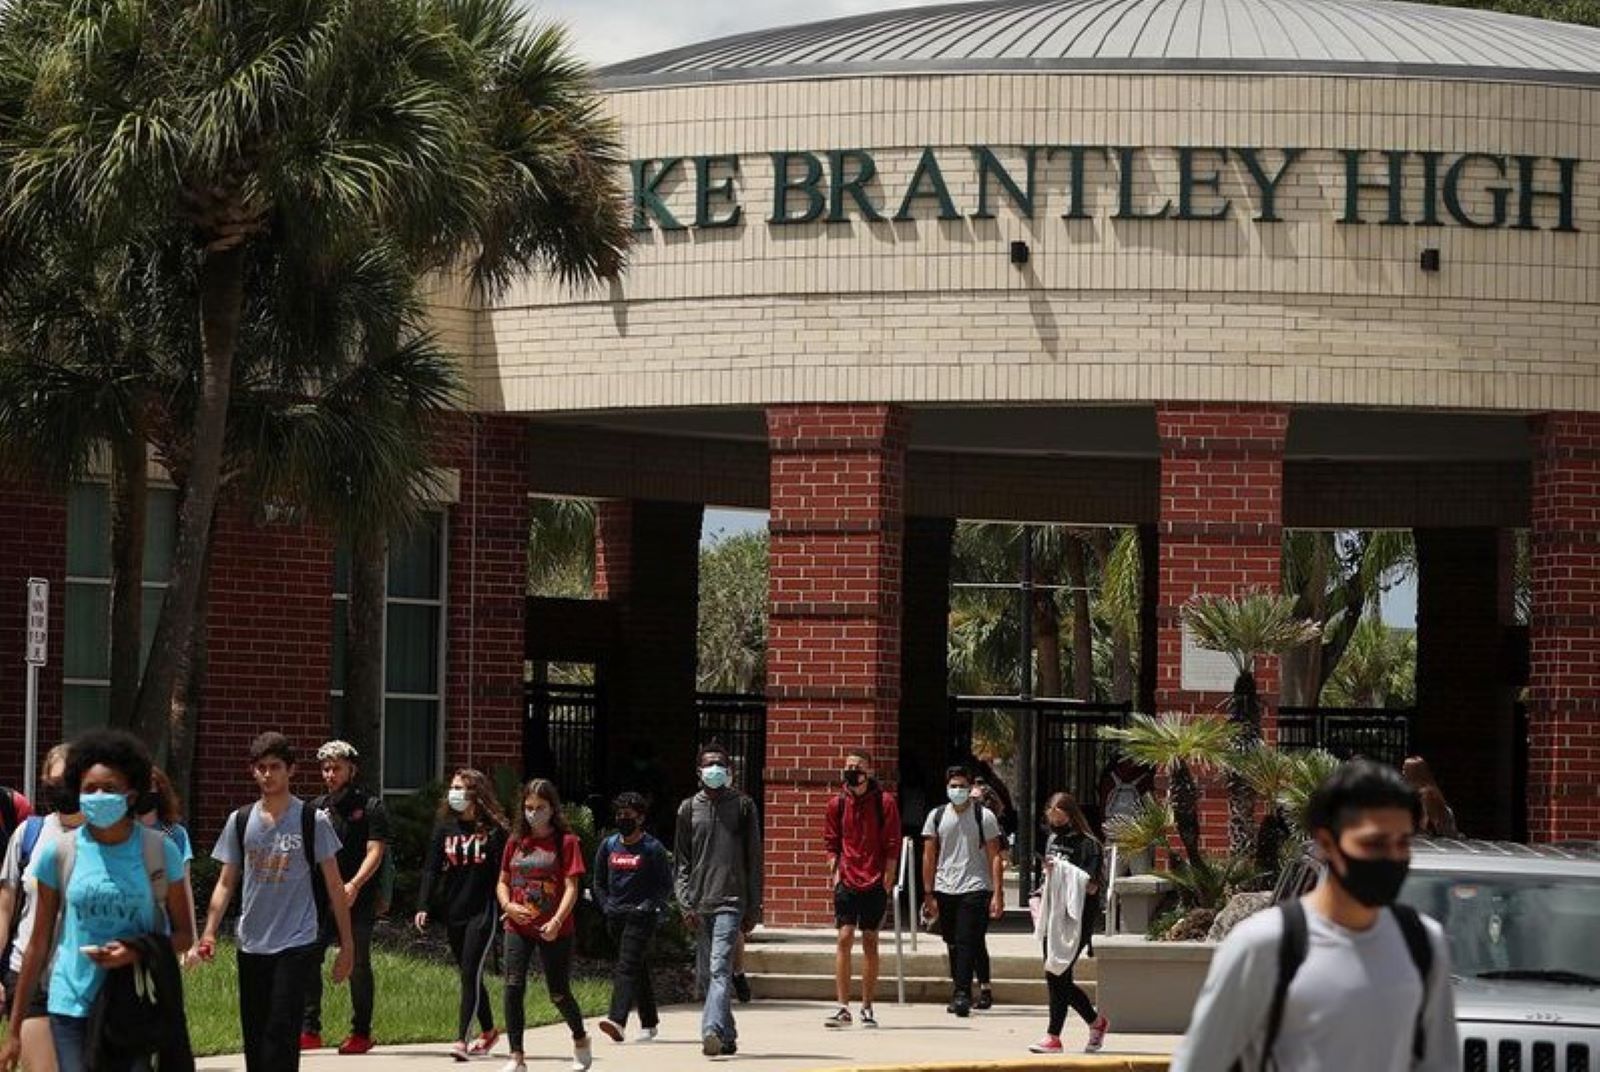 Students leave Lake Brantley High School after the final bell on Thursday, August 27, 2020. The Seminole County school district, like its counterparts across the state, opened schools for in-person classes this month.(Stephen M. Dowell/Orlando Sentinel) (Stephen M. Dowell/Orlando Sentinel)